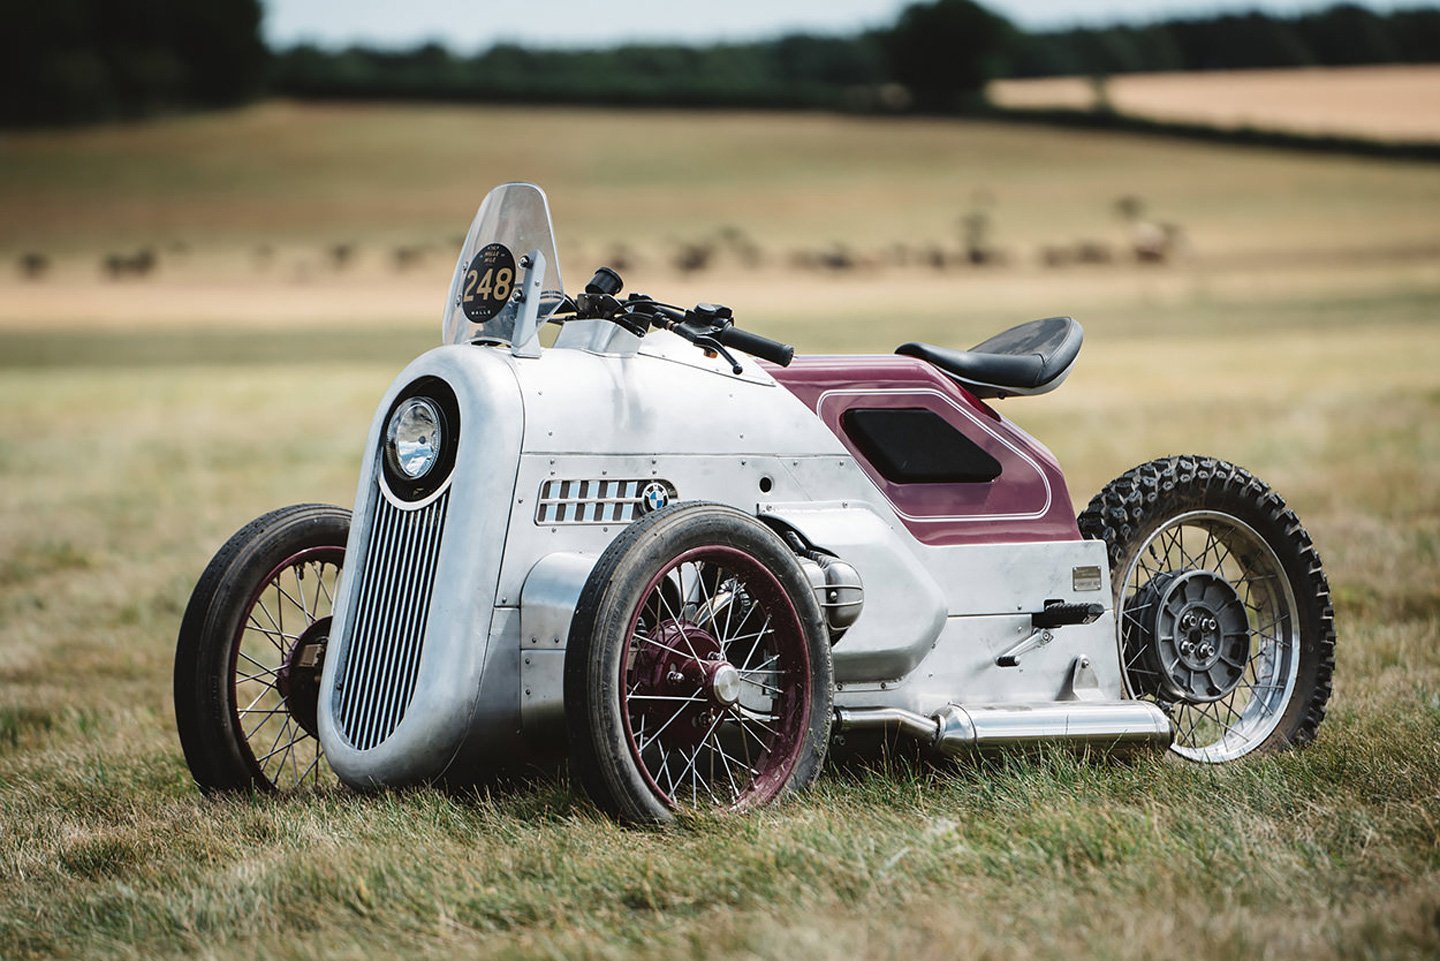 #This 3-wheeled BMW R100 custom build takes inspiration from pre-war racecars